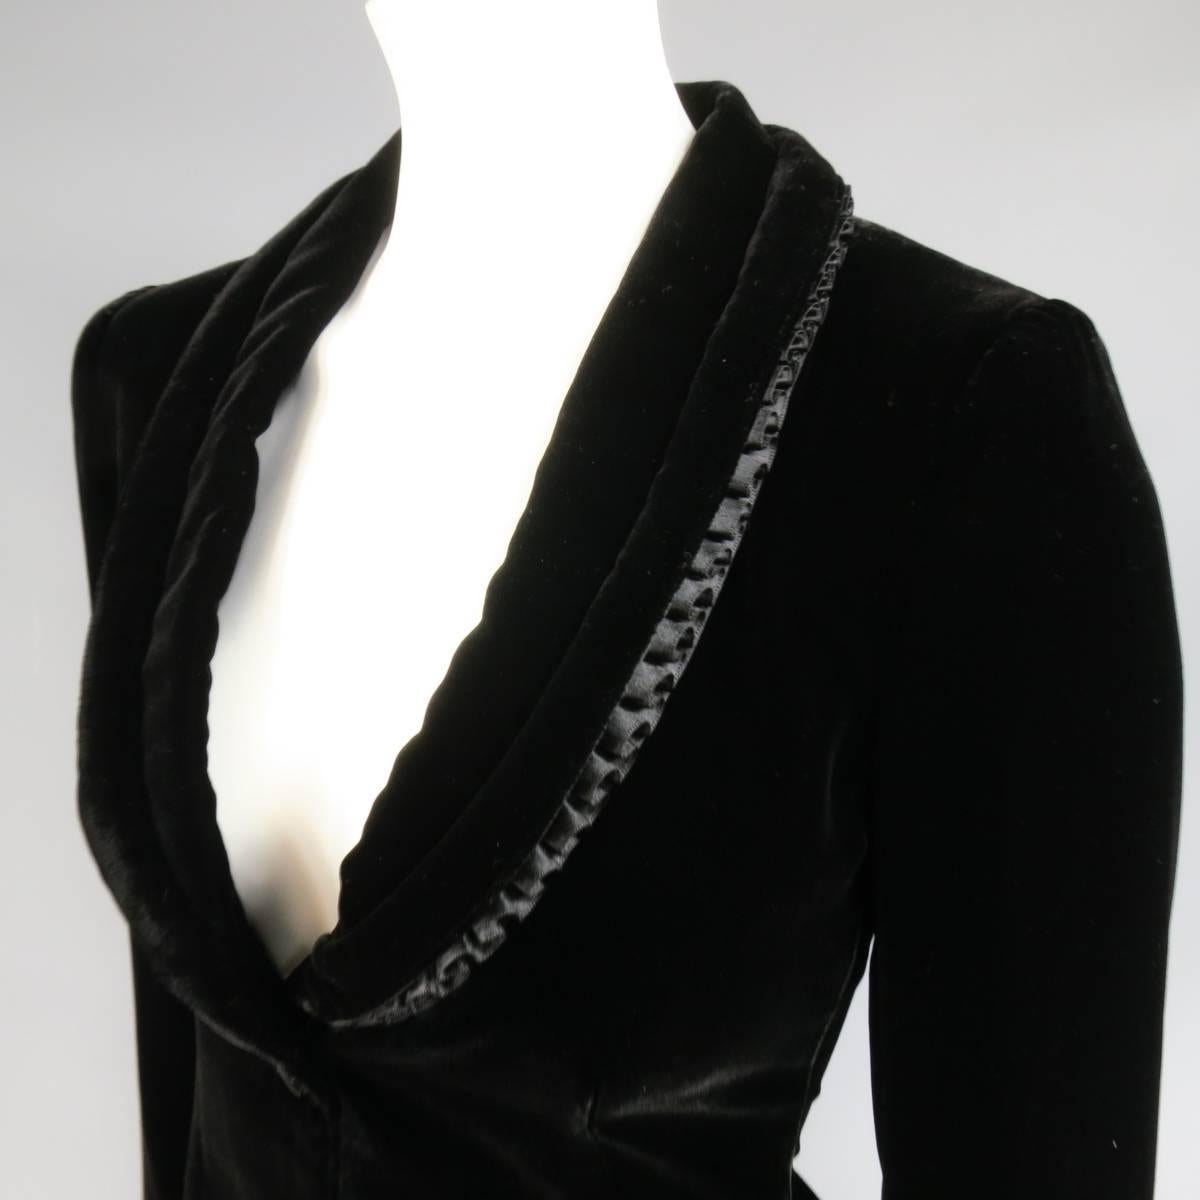 This gorgeous cropped tuxedo jacket by ARMANI COLLEZIONI comes in a rich black velvet and features a round shawl collar with under ruffle detail, single button closure, and tailored silhouette. Made in Italy.
 
Excellent Pre-Owned